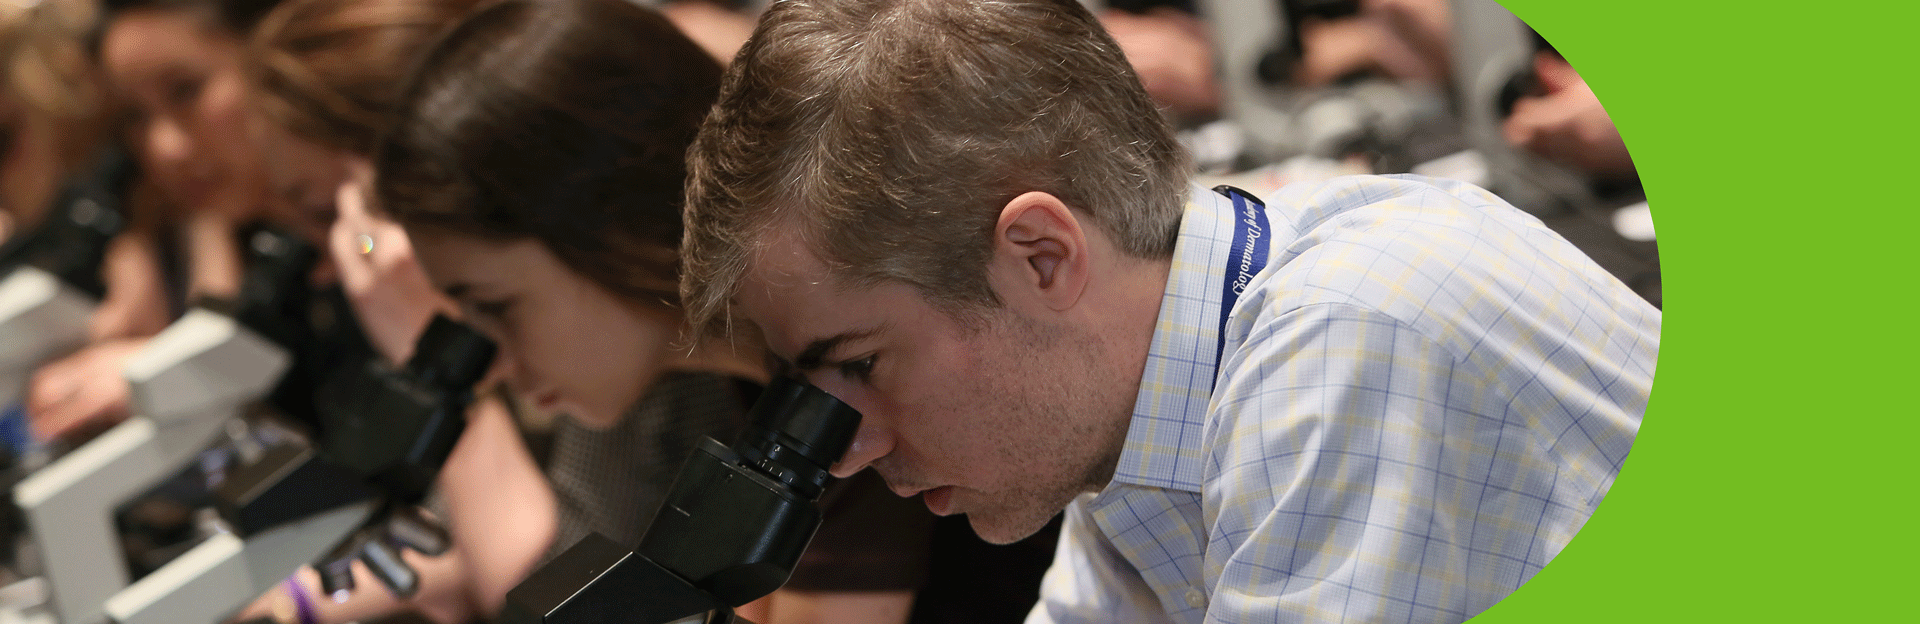 Young dermatologists looking into microscopes